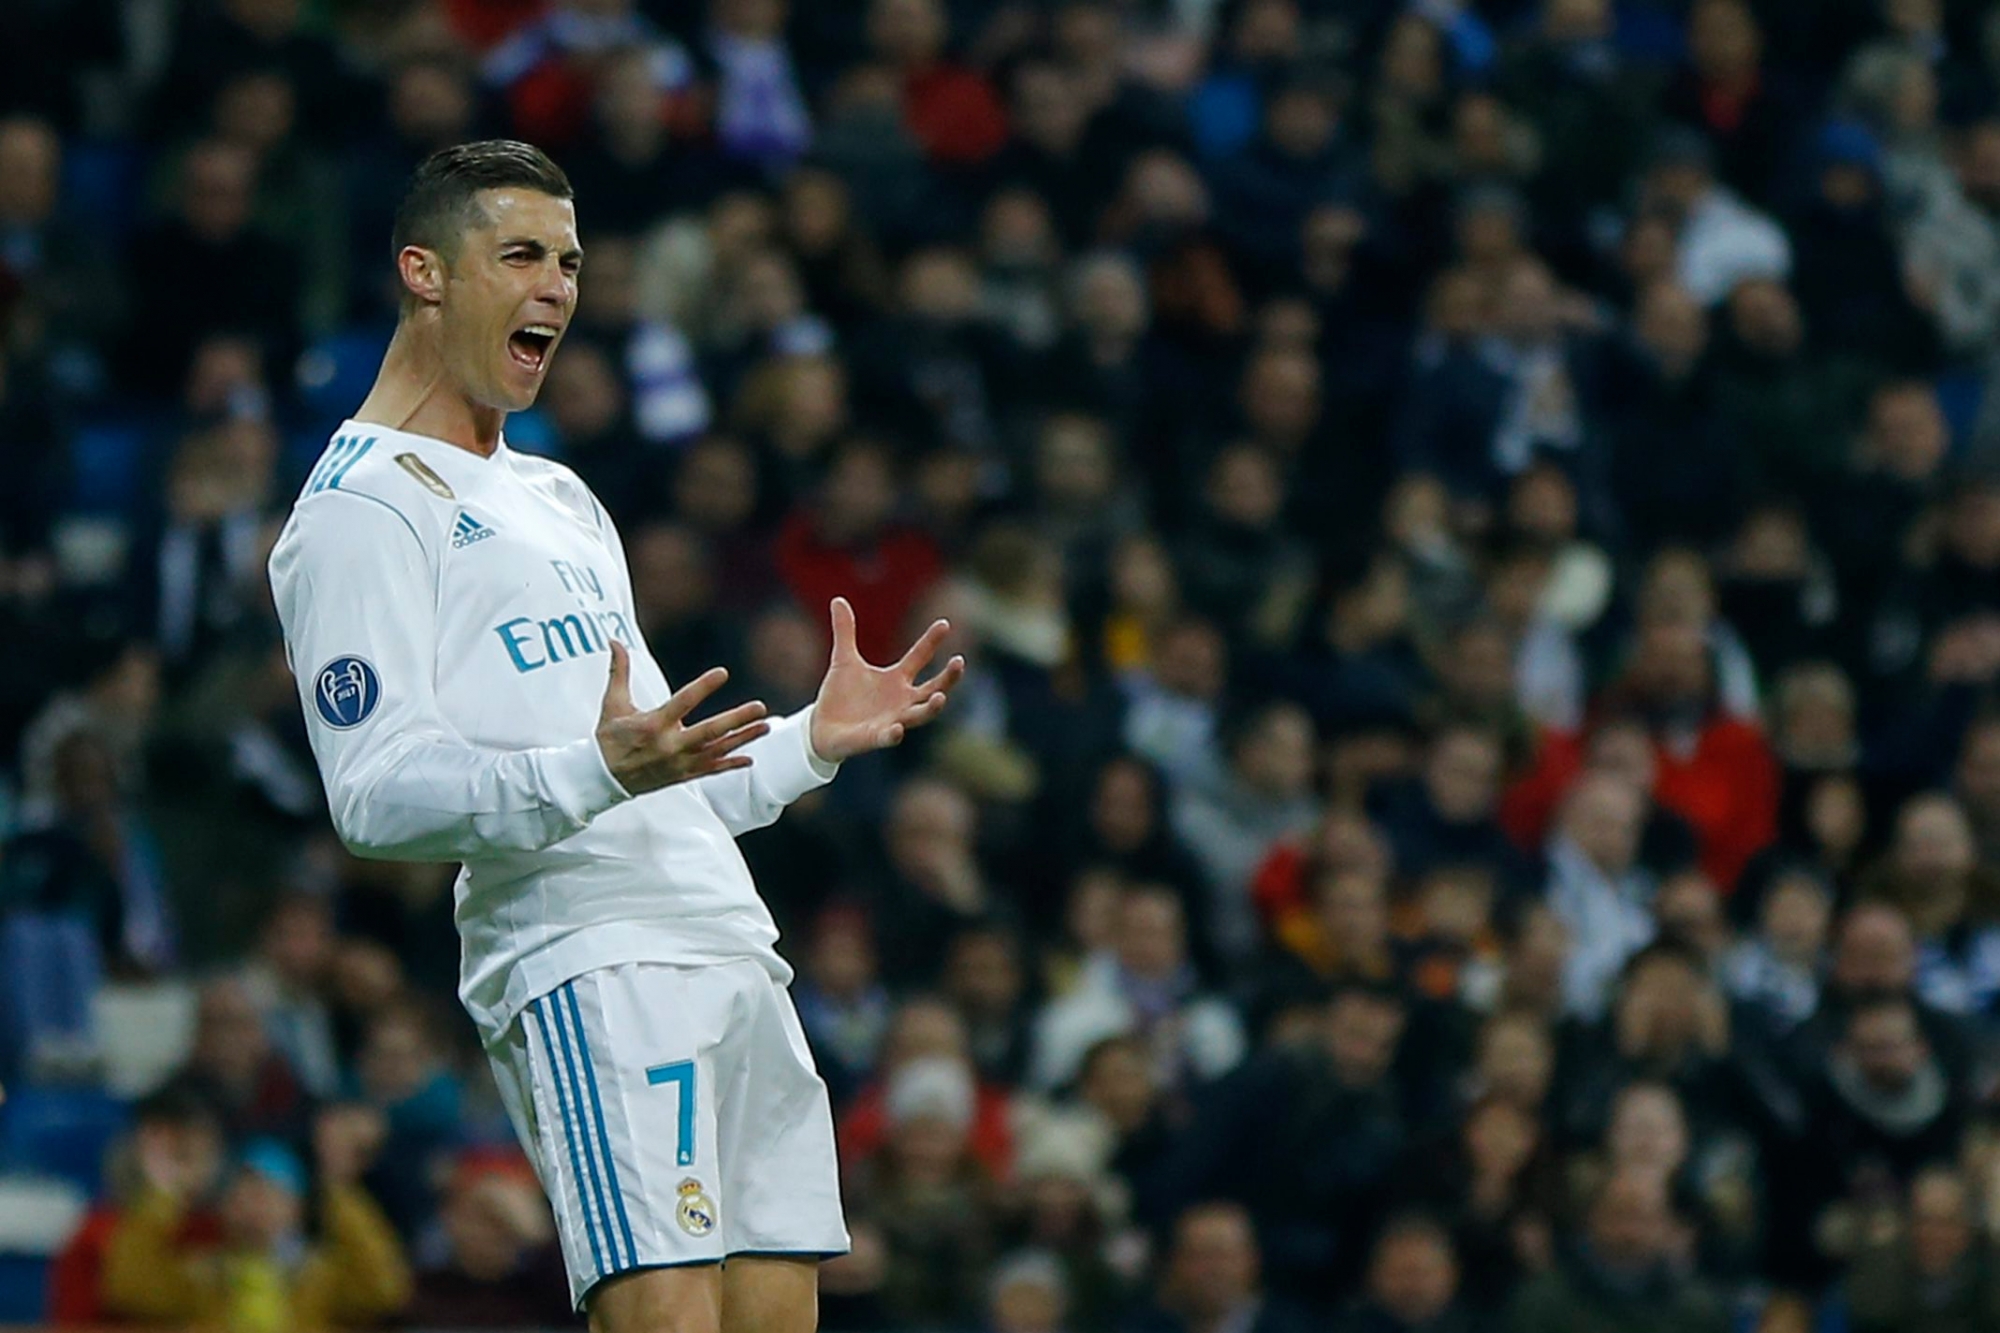 Real Madrid's Cristiano Ronaldo reacts after missing a chance to score during the Champions League Group H soccer match between Real Madrid and Borussia Dortmund at the Santiago Bernabeu stadium in Madrid, Spain, Wednesday, Dec. 6, 2017. (AP Photo/Francisco Seco) Spain Soccer Champions League